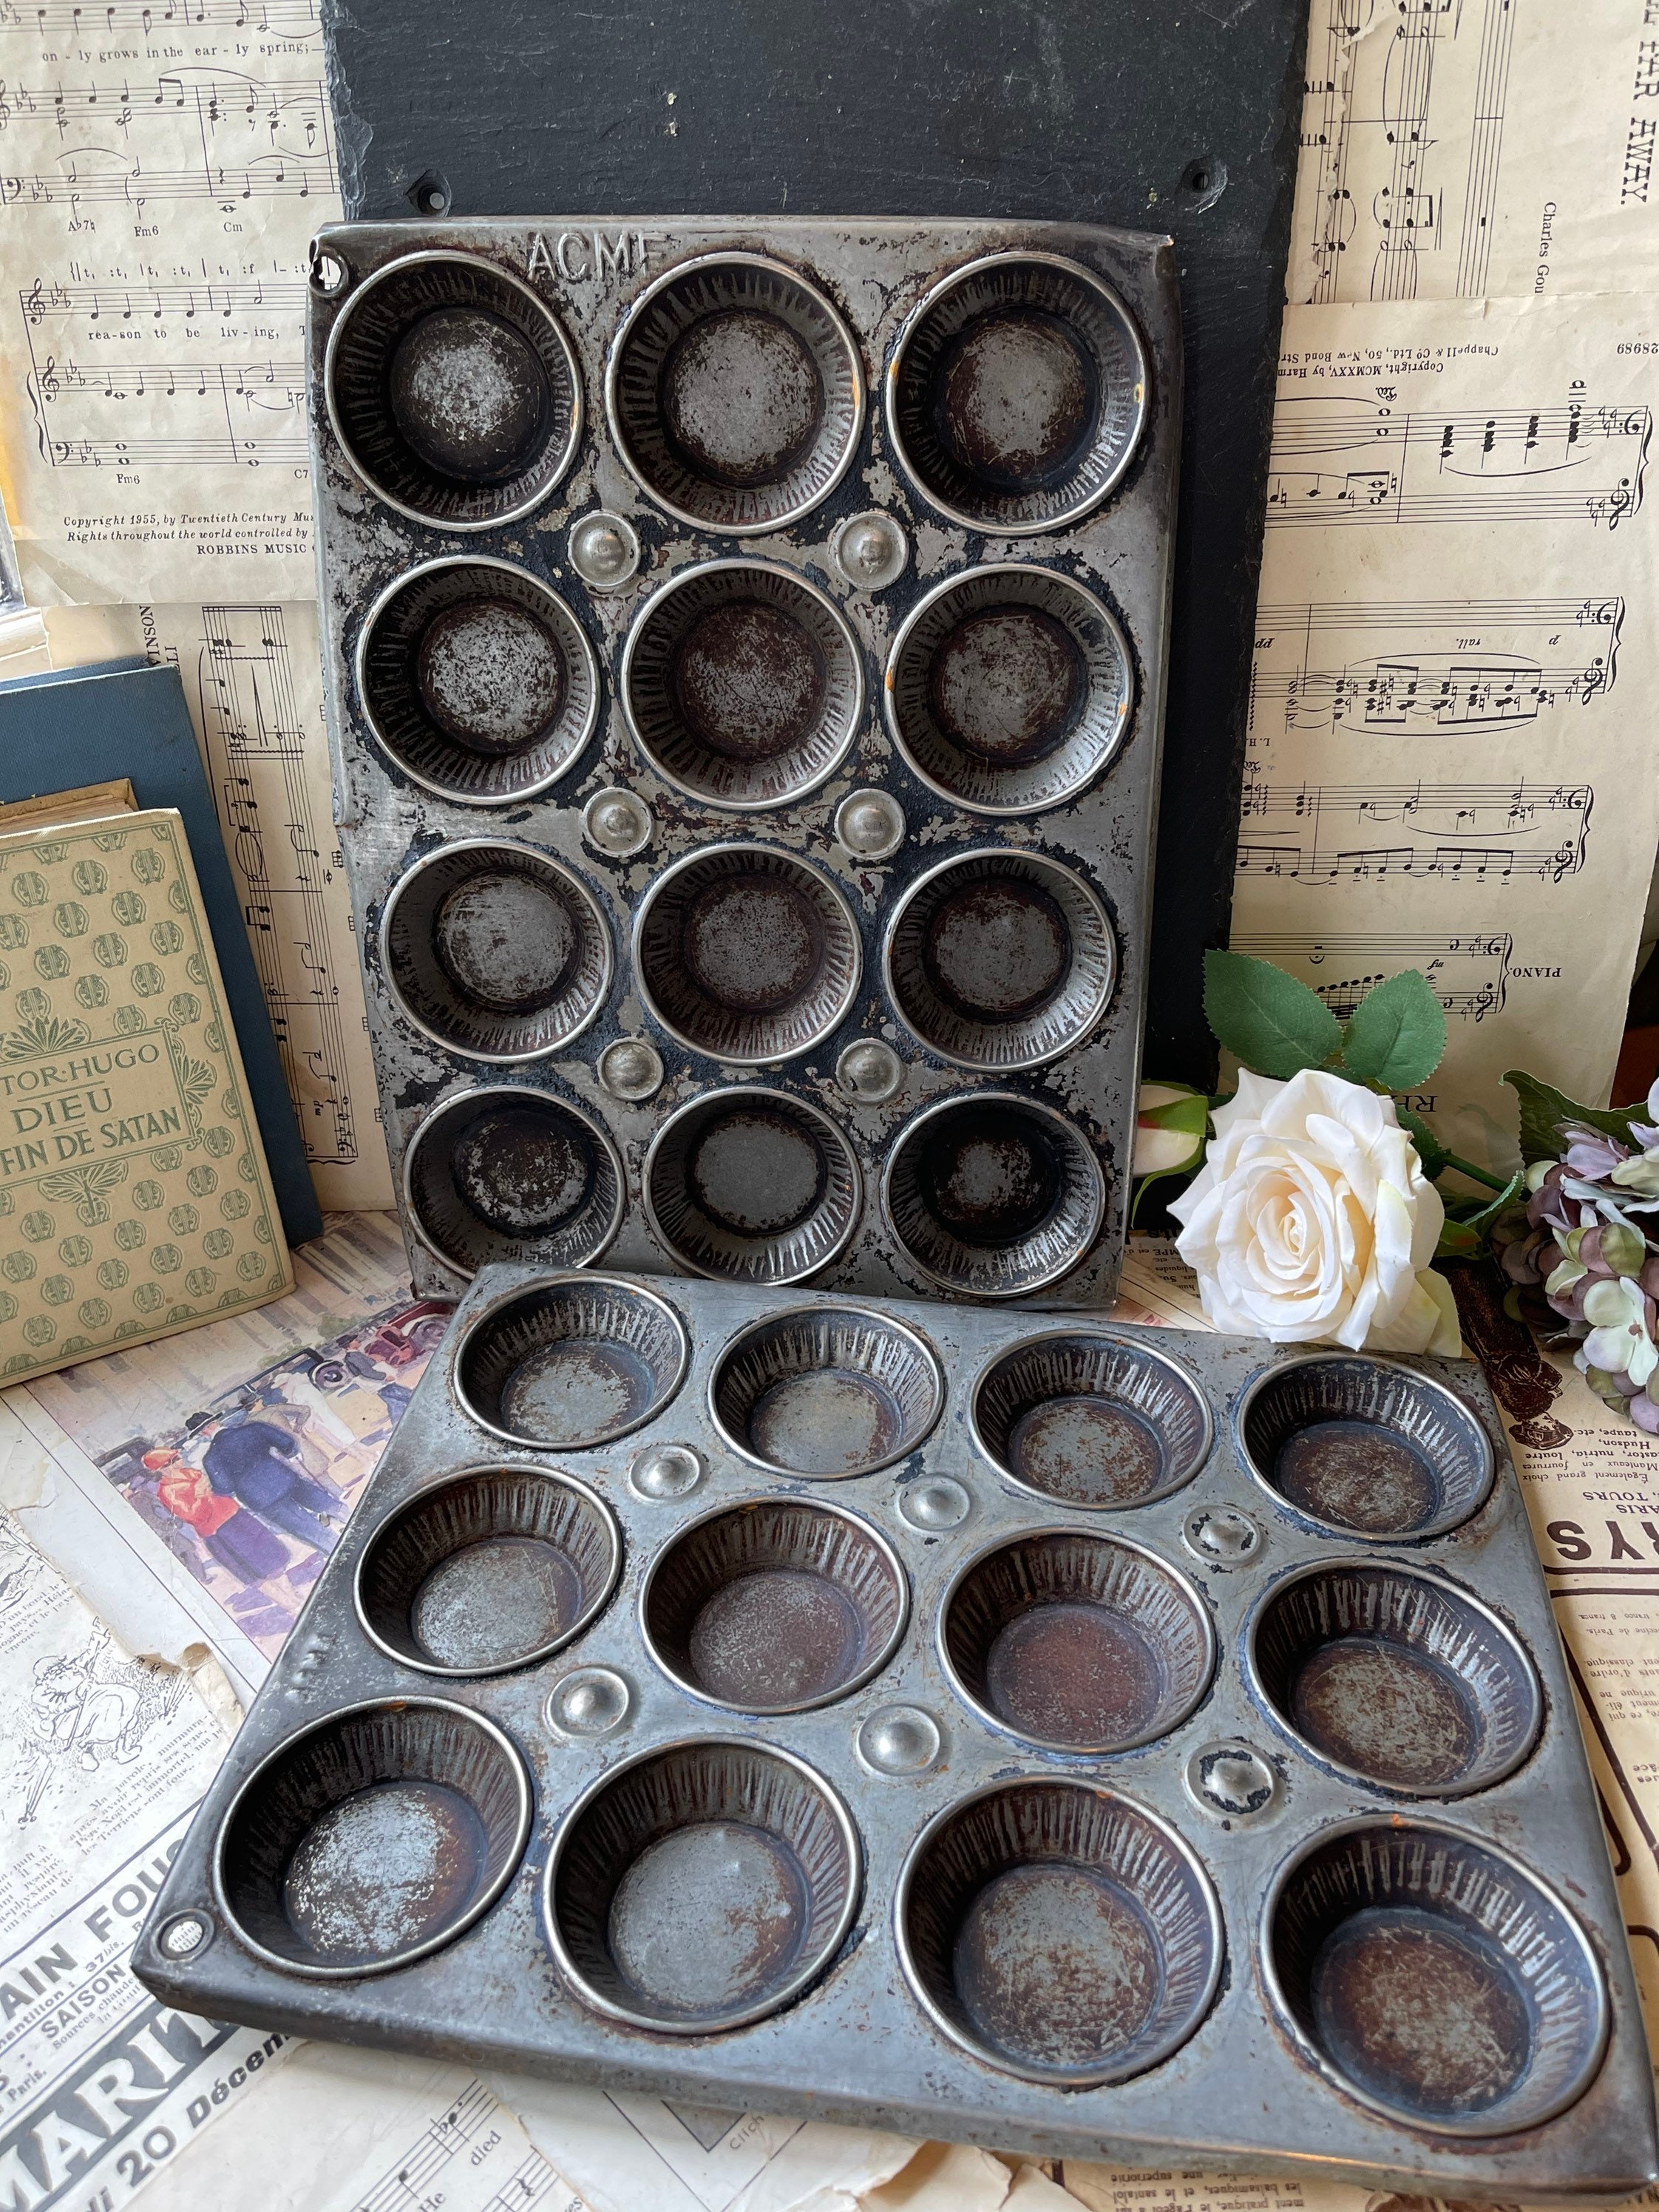 Vintage Cast Iron Muffin Pan Unmarked Makes 6 Muffins